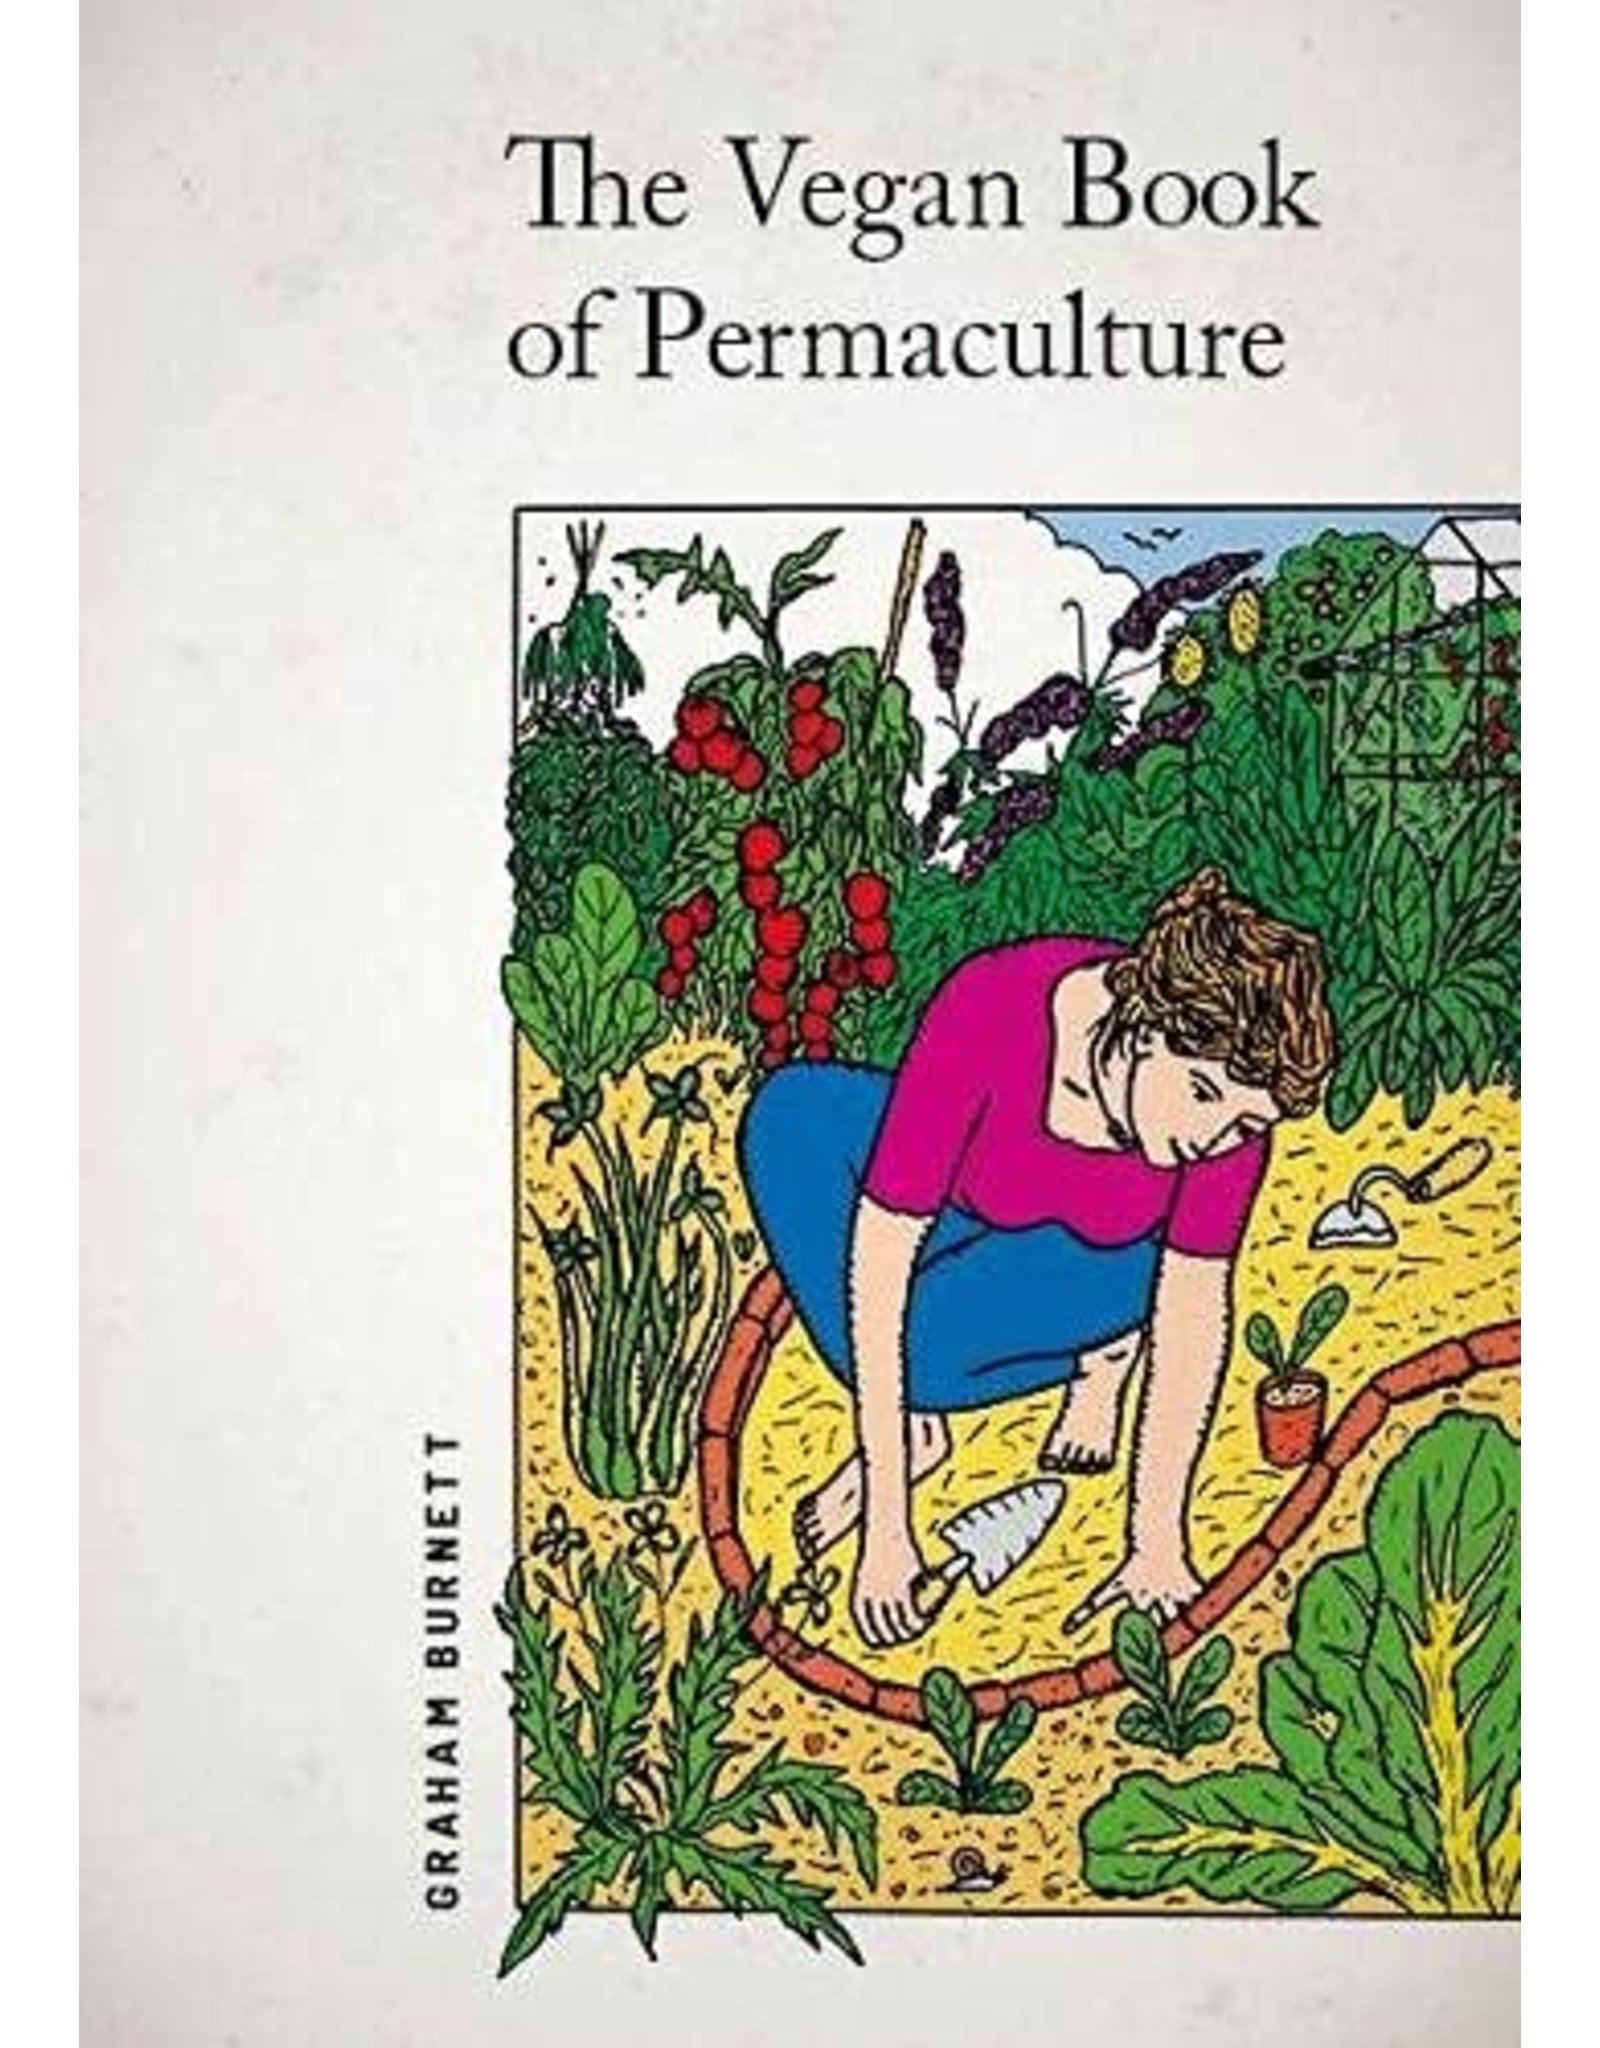 Literature The Vegan Book of Permaculture: Recipes for Healthy Eating and Earthright Living